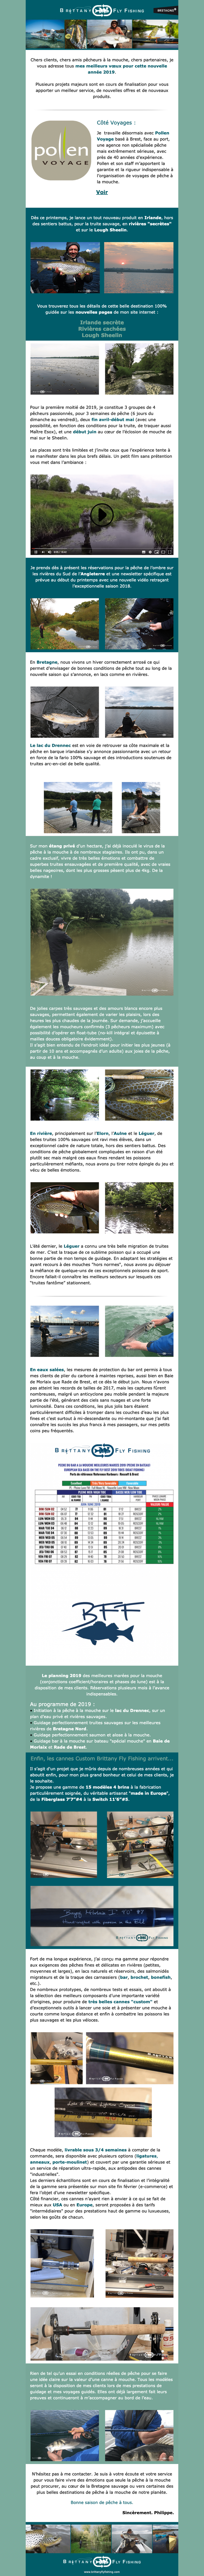 brittany-fly-fishing-actu-nouveaute-2019